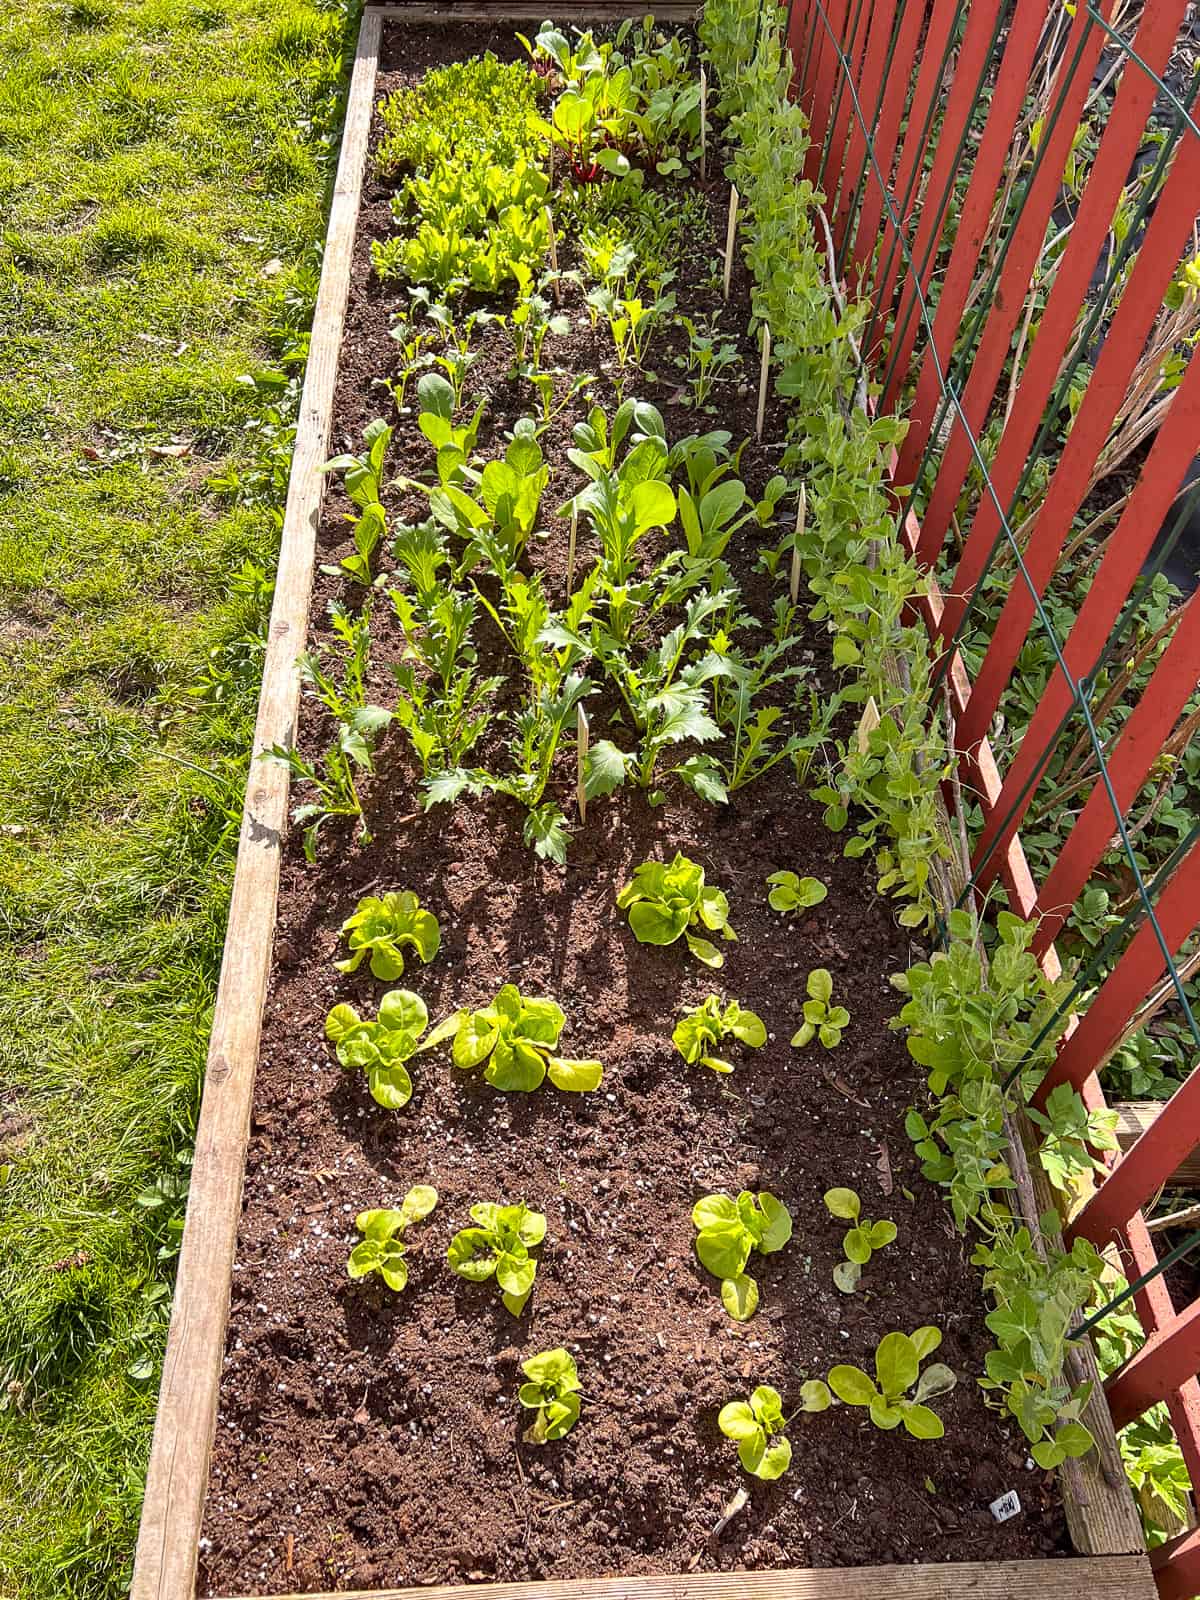 A raised bed planted in the Square Foot Garden method, filled with plants and with peas growing on the fence one side.